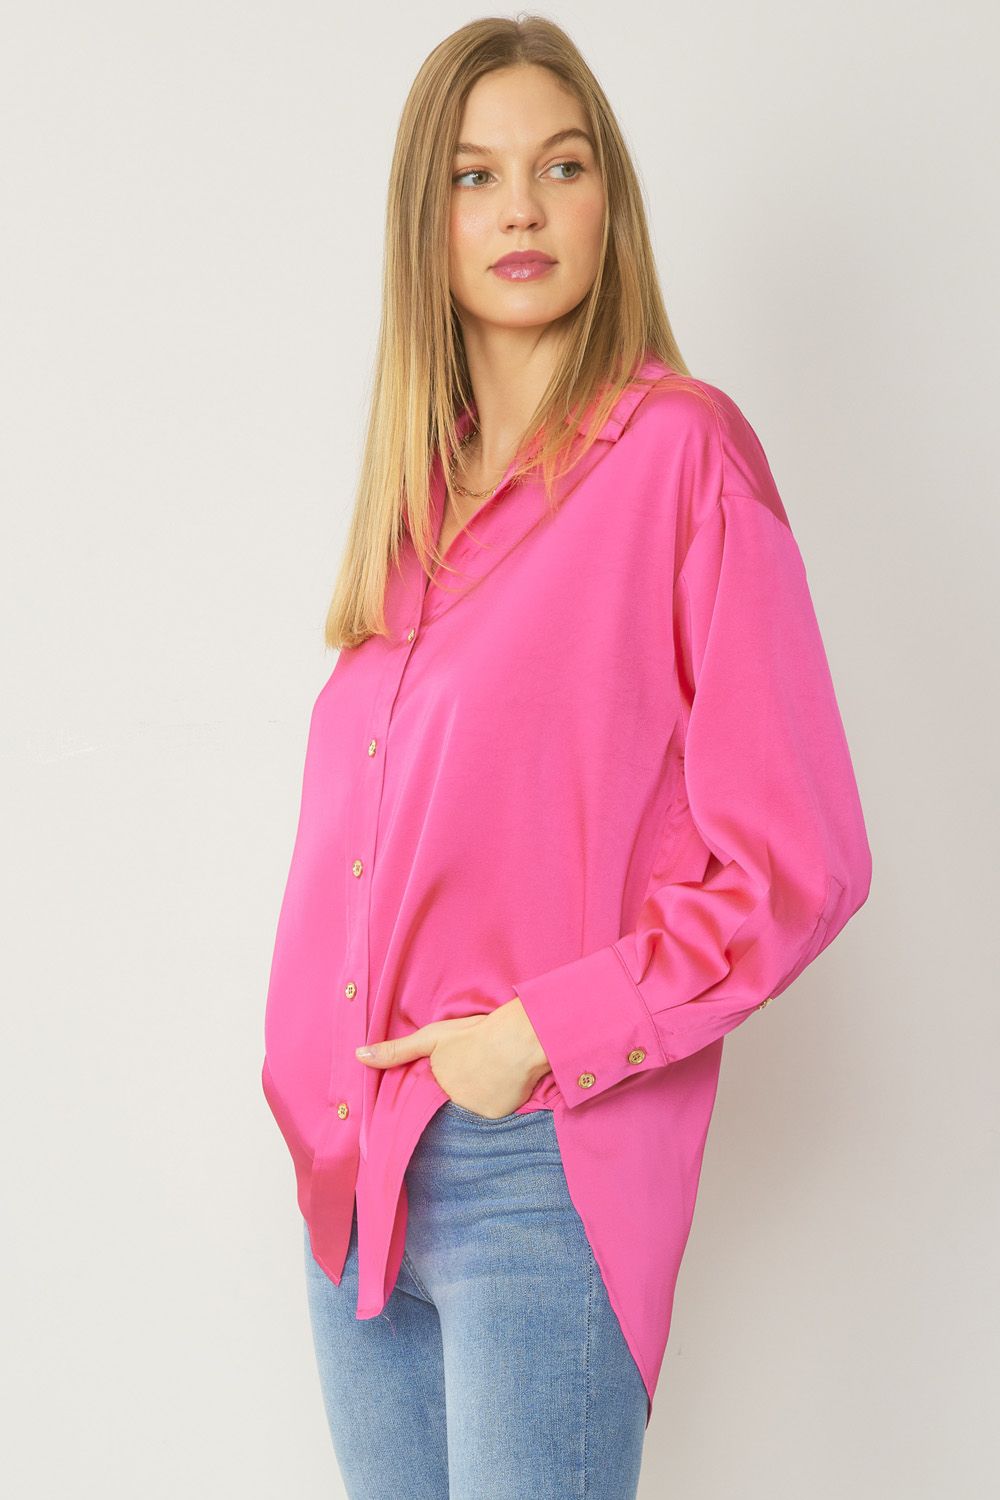 ENTRO INC Women's Top HOT PINK / S Satin Button Up Collared Top || David's Clothing T18724A